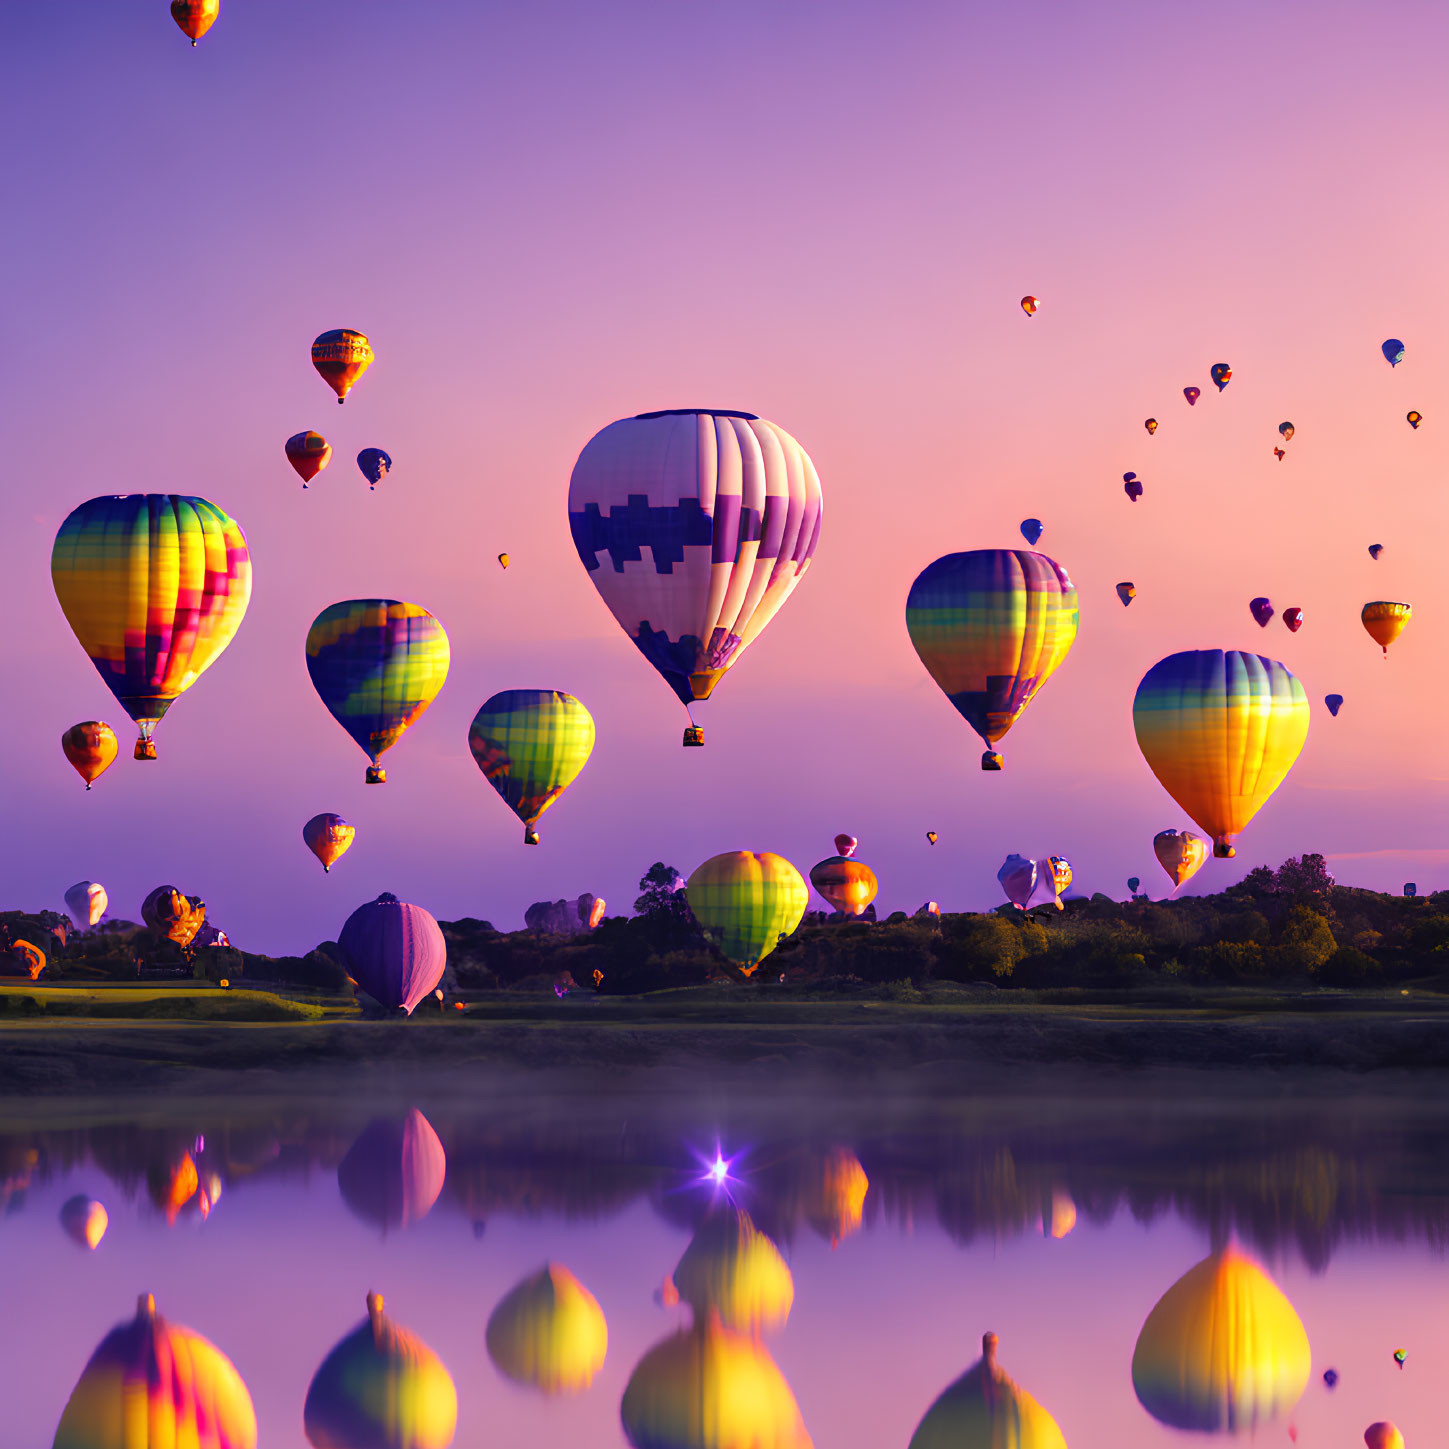 Vibrant hot air balloons in dusk sky over peaceful water